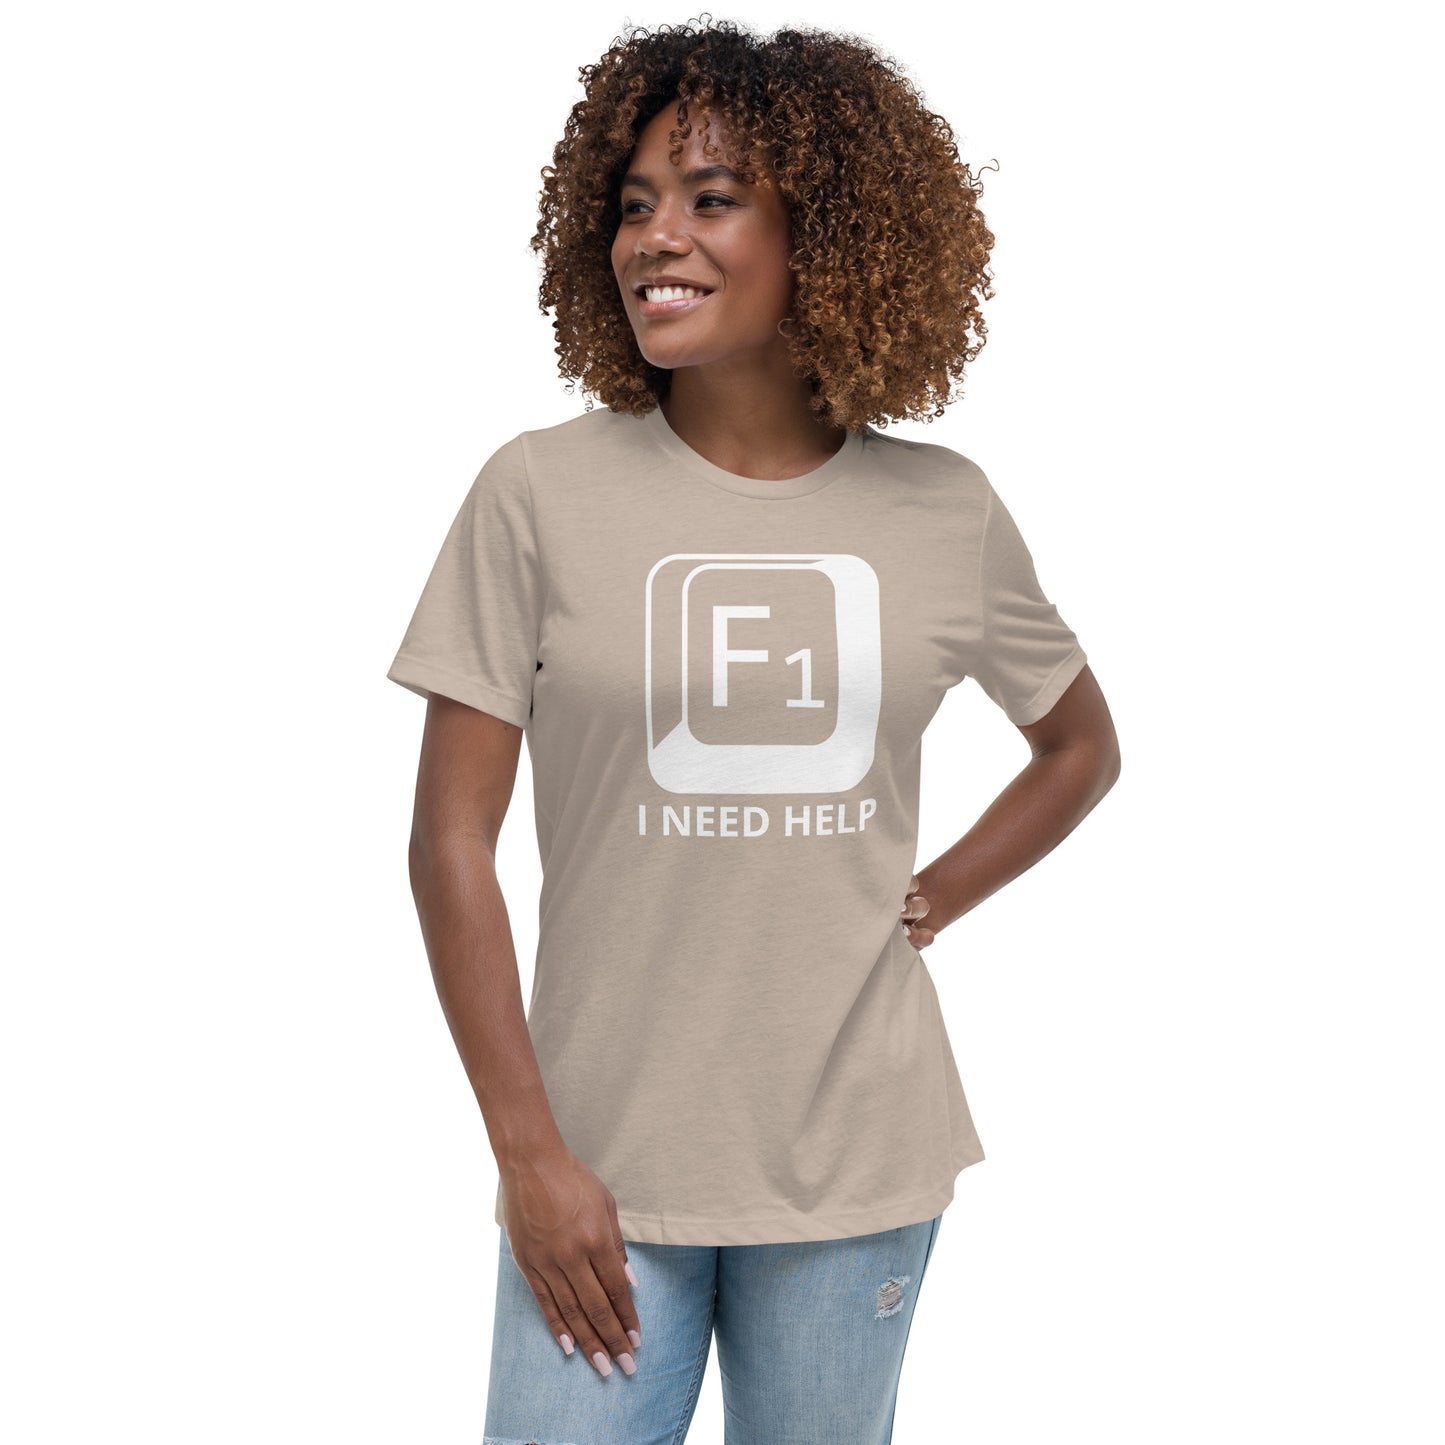 Woman with stone t-shirt with picture of "F1" key and text "I need help"